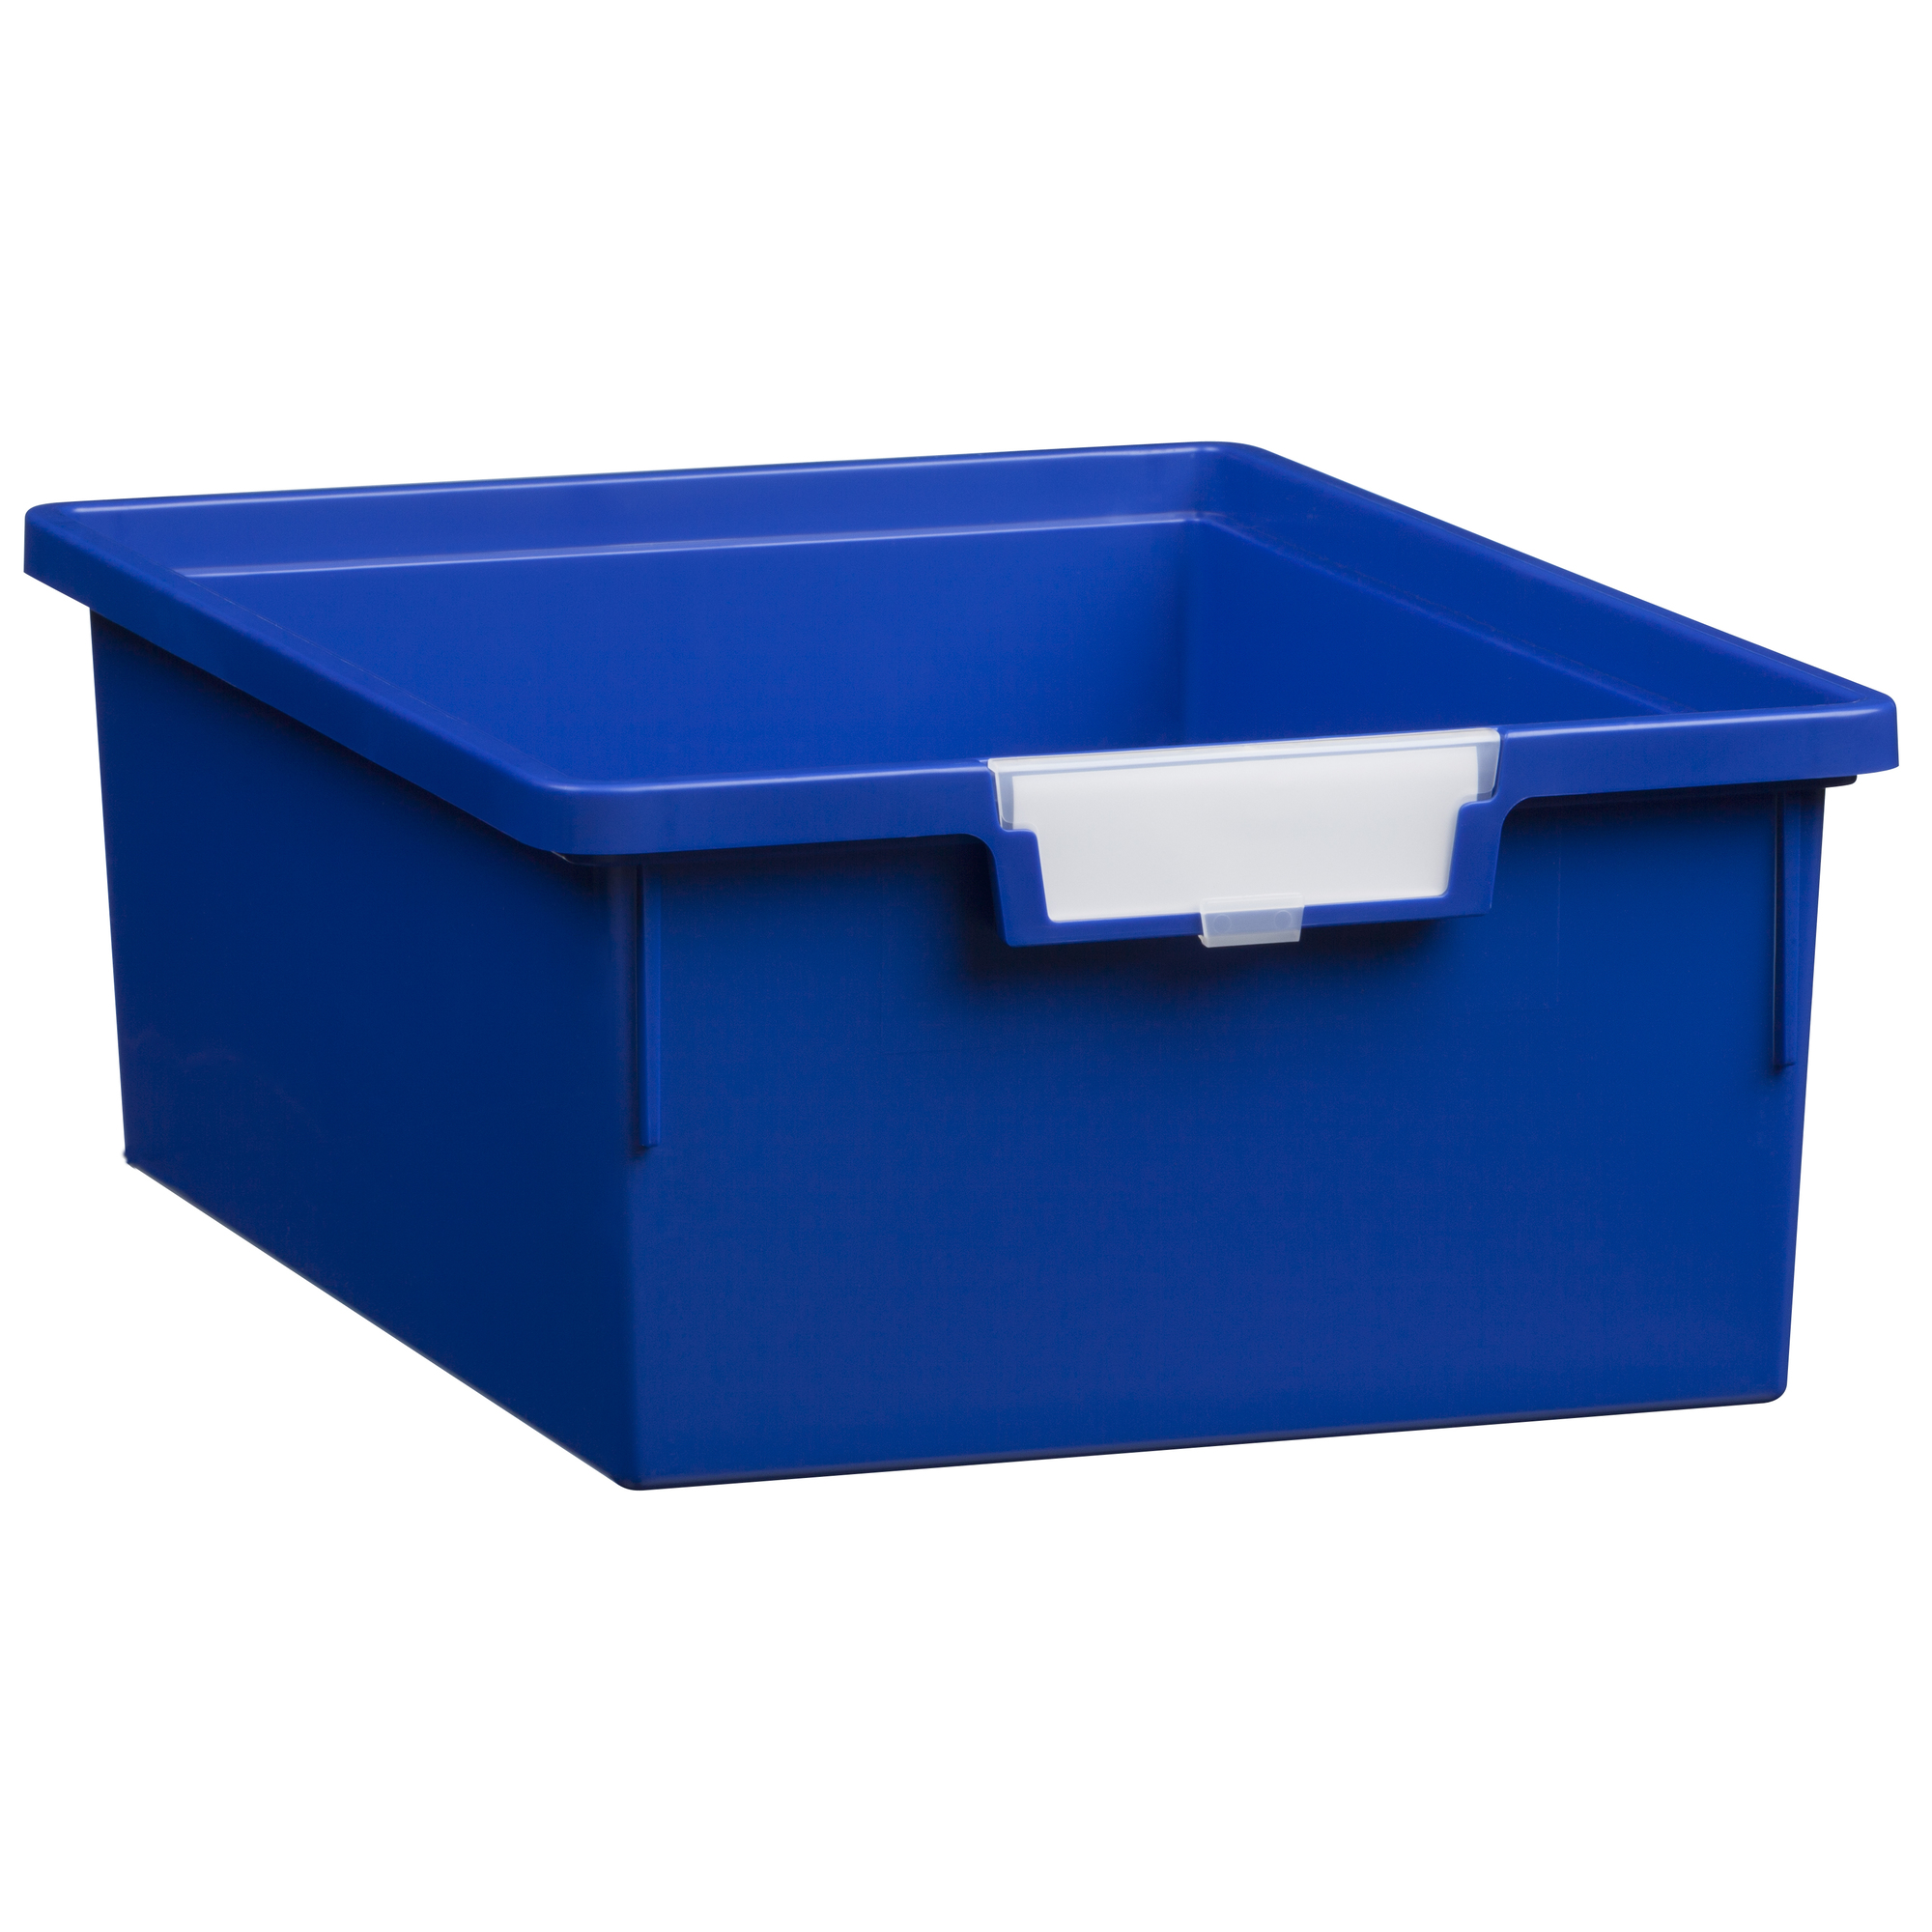 Certwood StorWerks, Slim Line 6Inch Tray in Primary Blue-3PK, Included (qty.) 3 Height 6 in, Model CE1952PB3